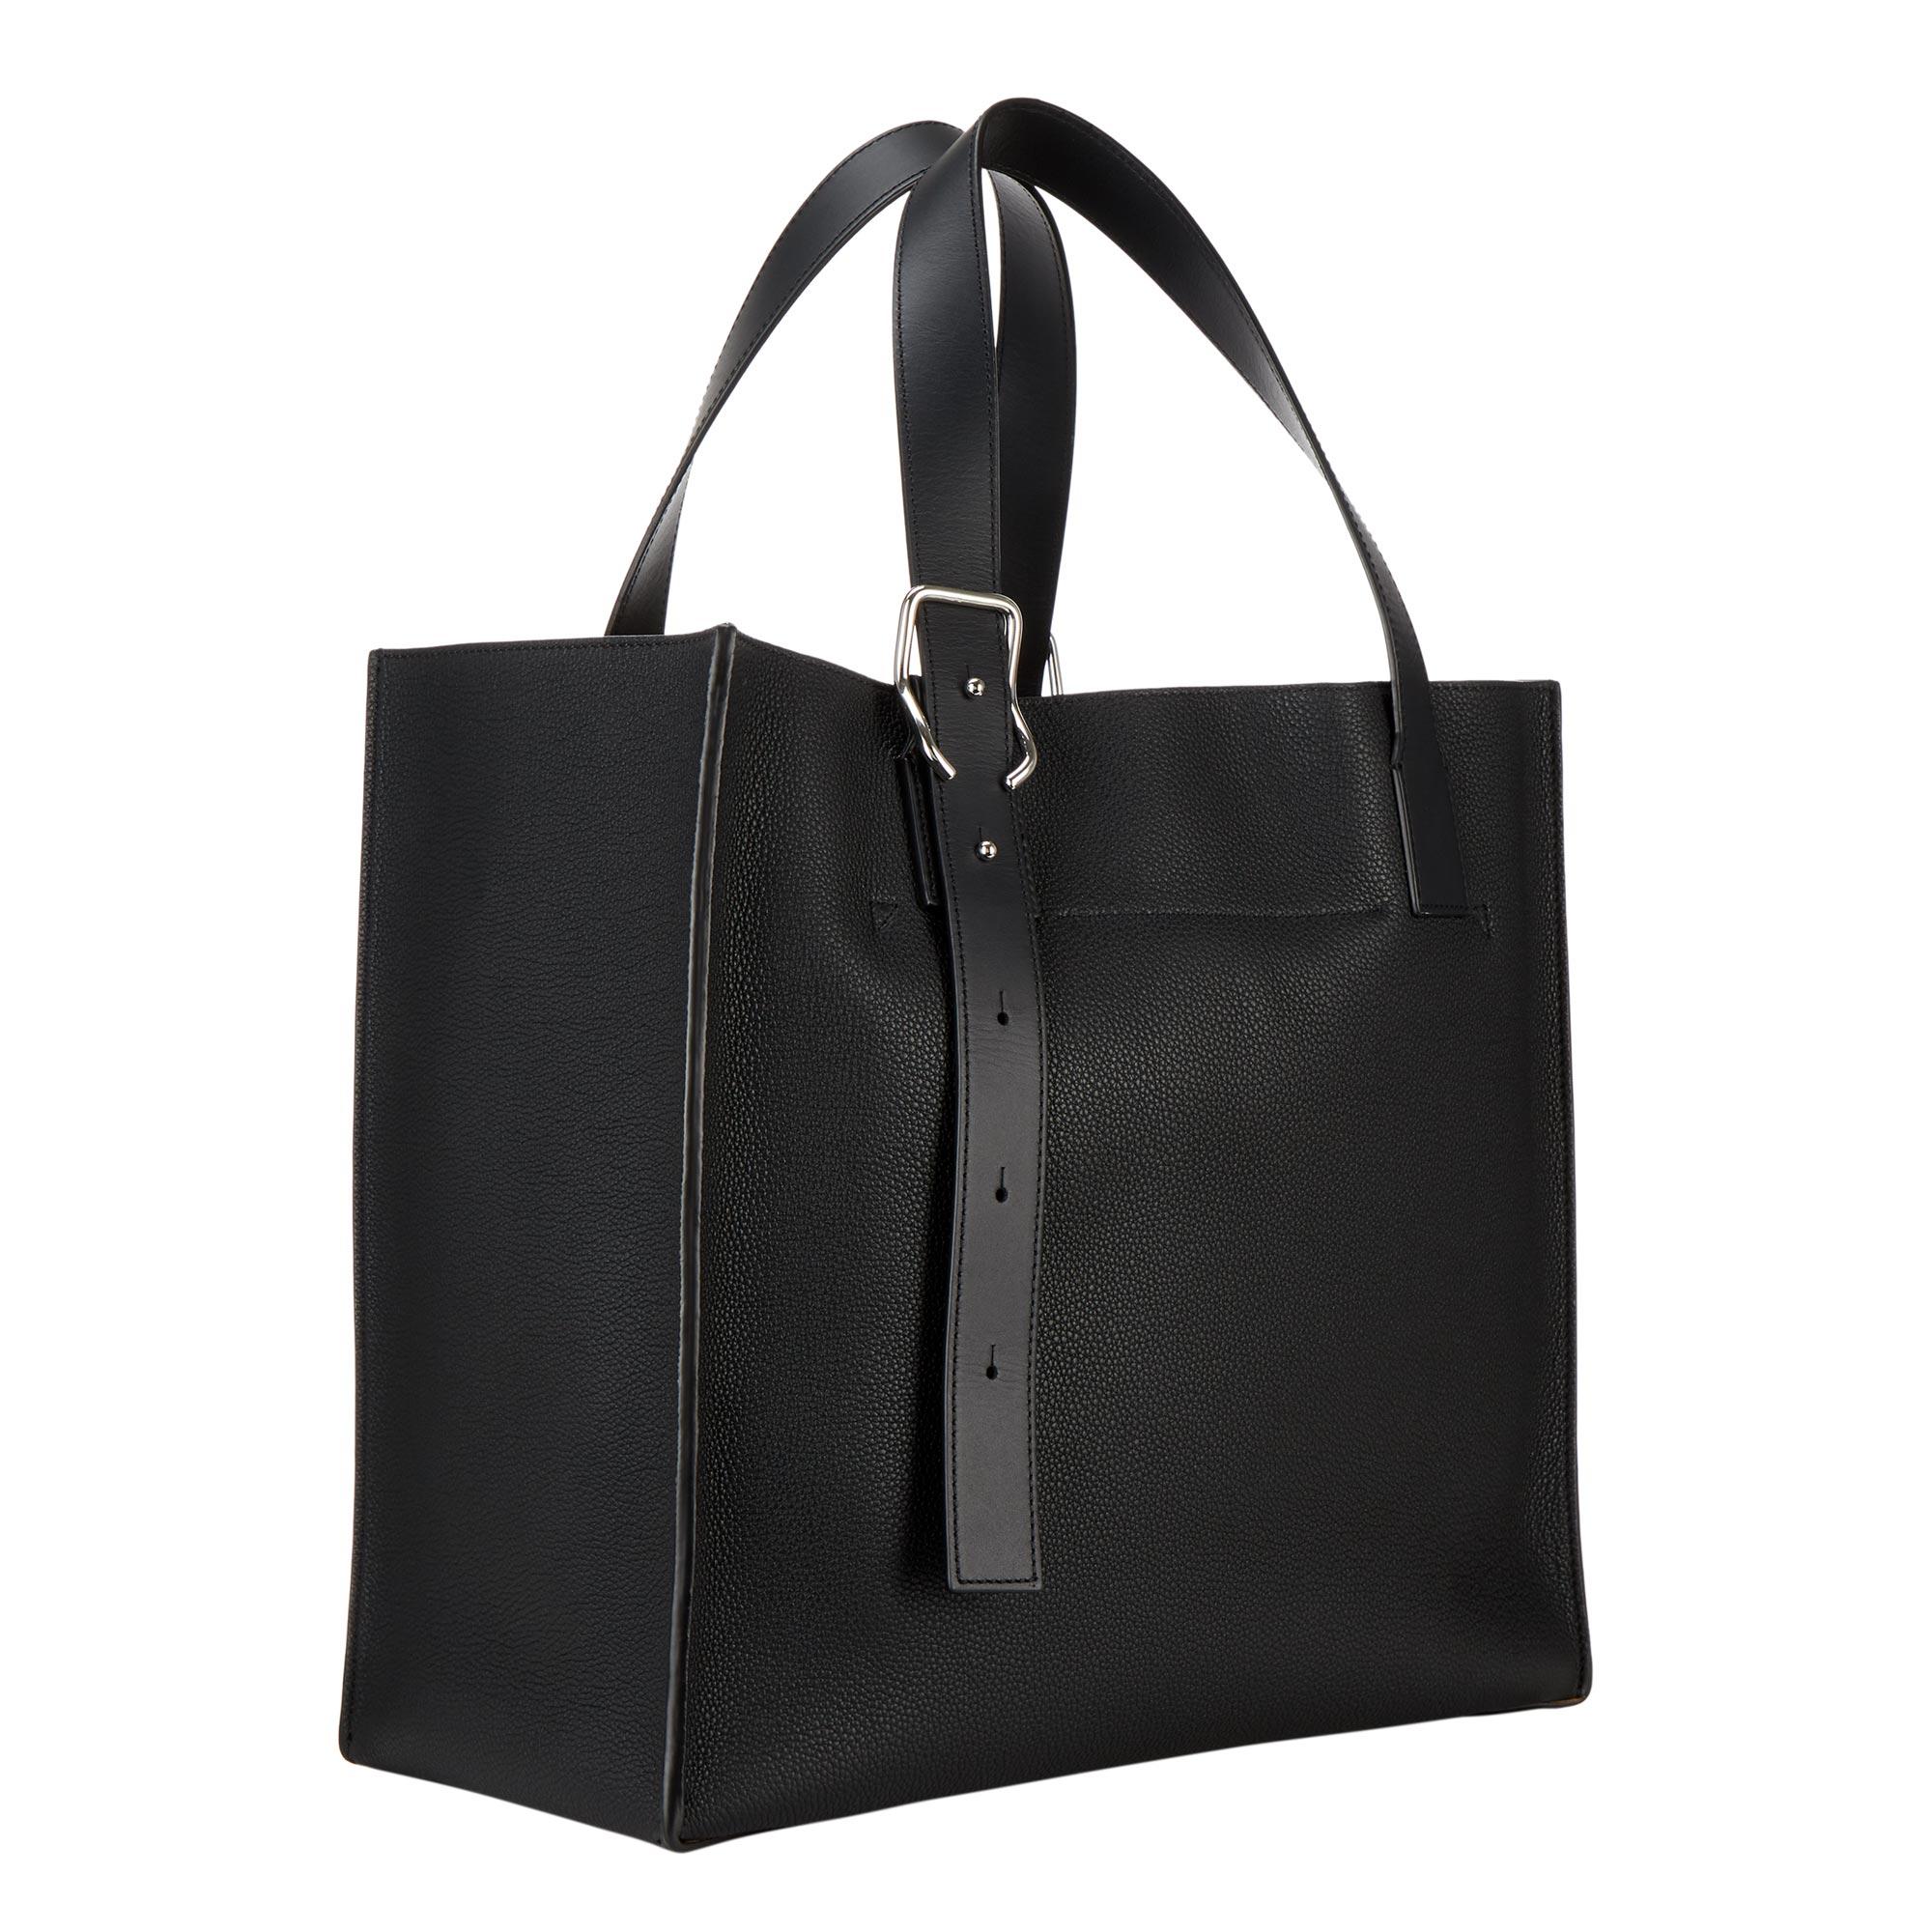 Buckle Leather Tote